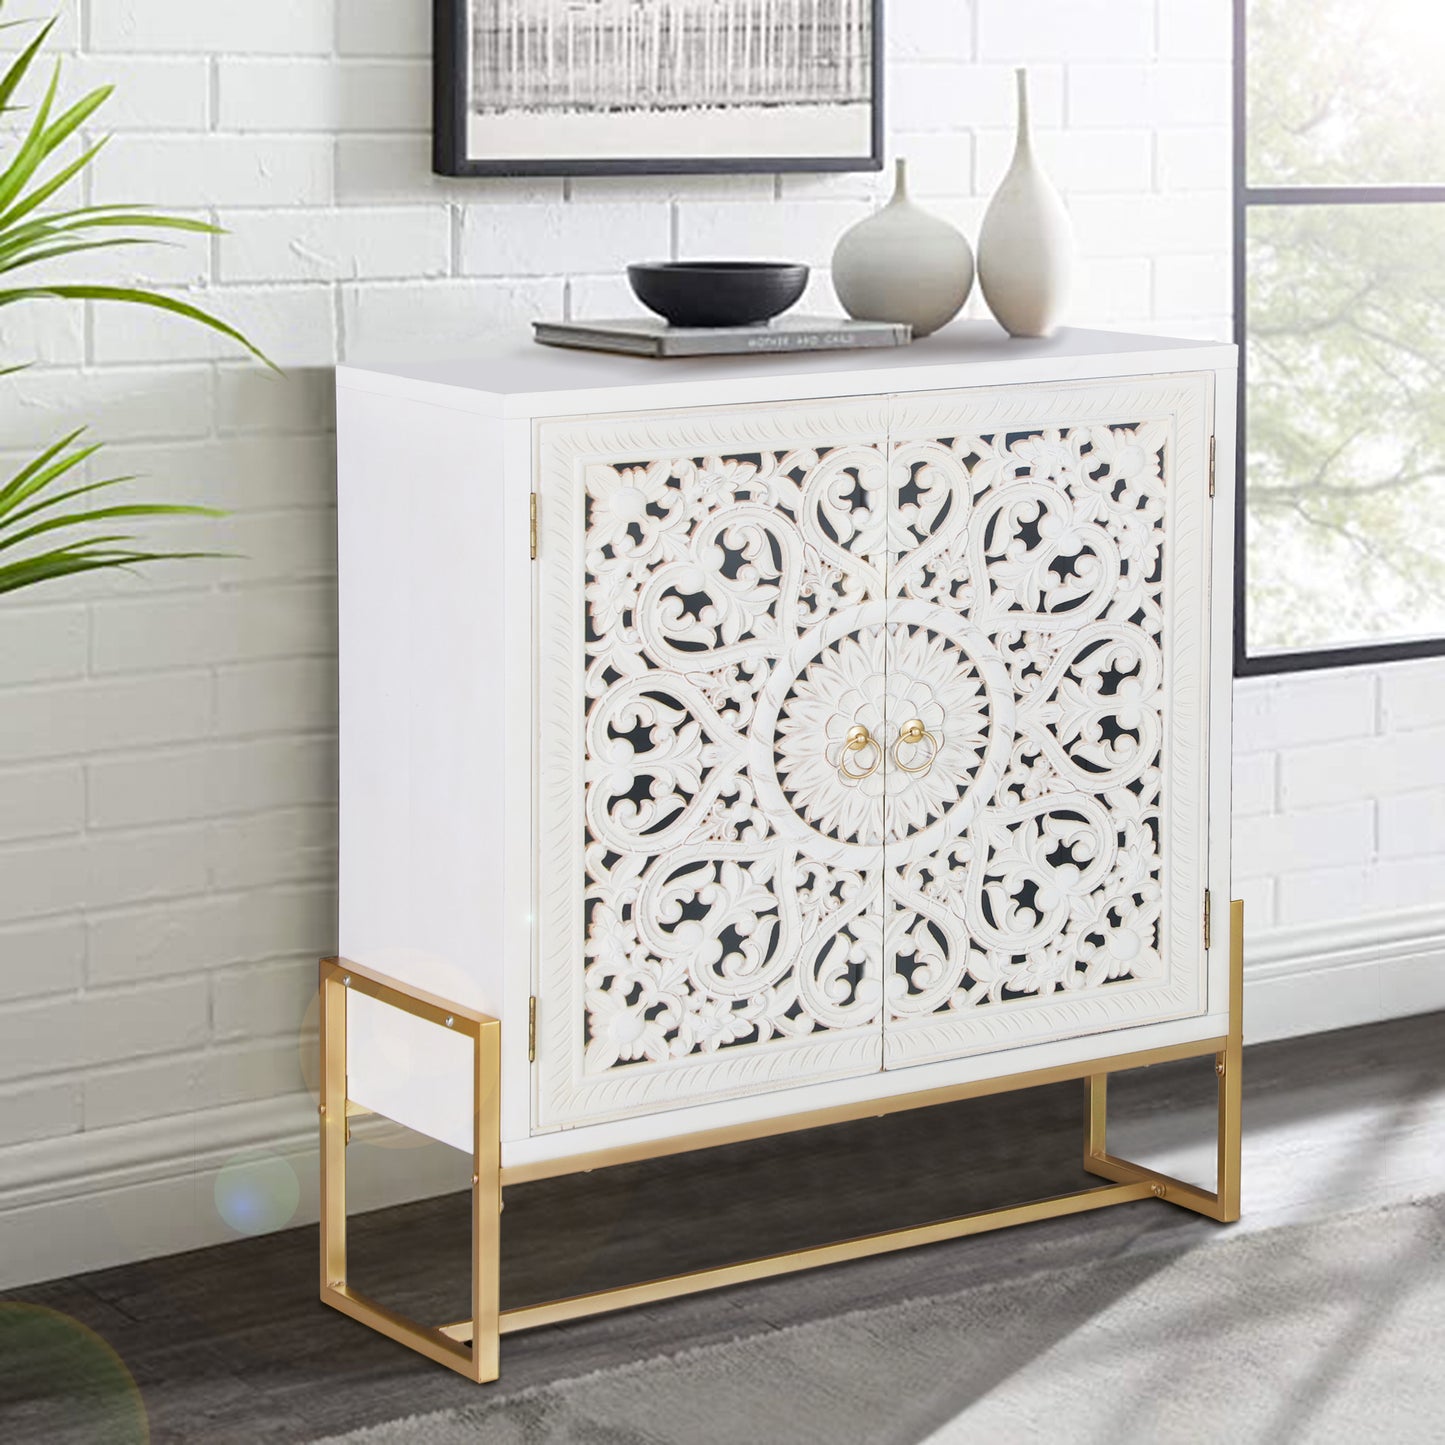 Alpha Joy 2-Door Hollow Carving Accent Cabinet with Metal Feet-White